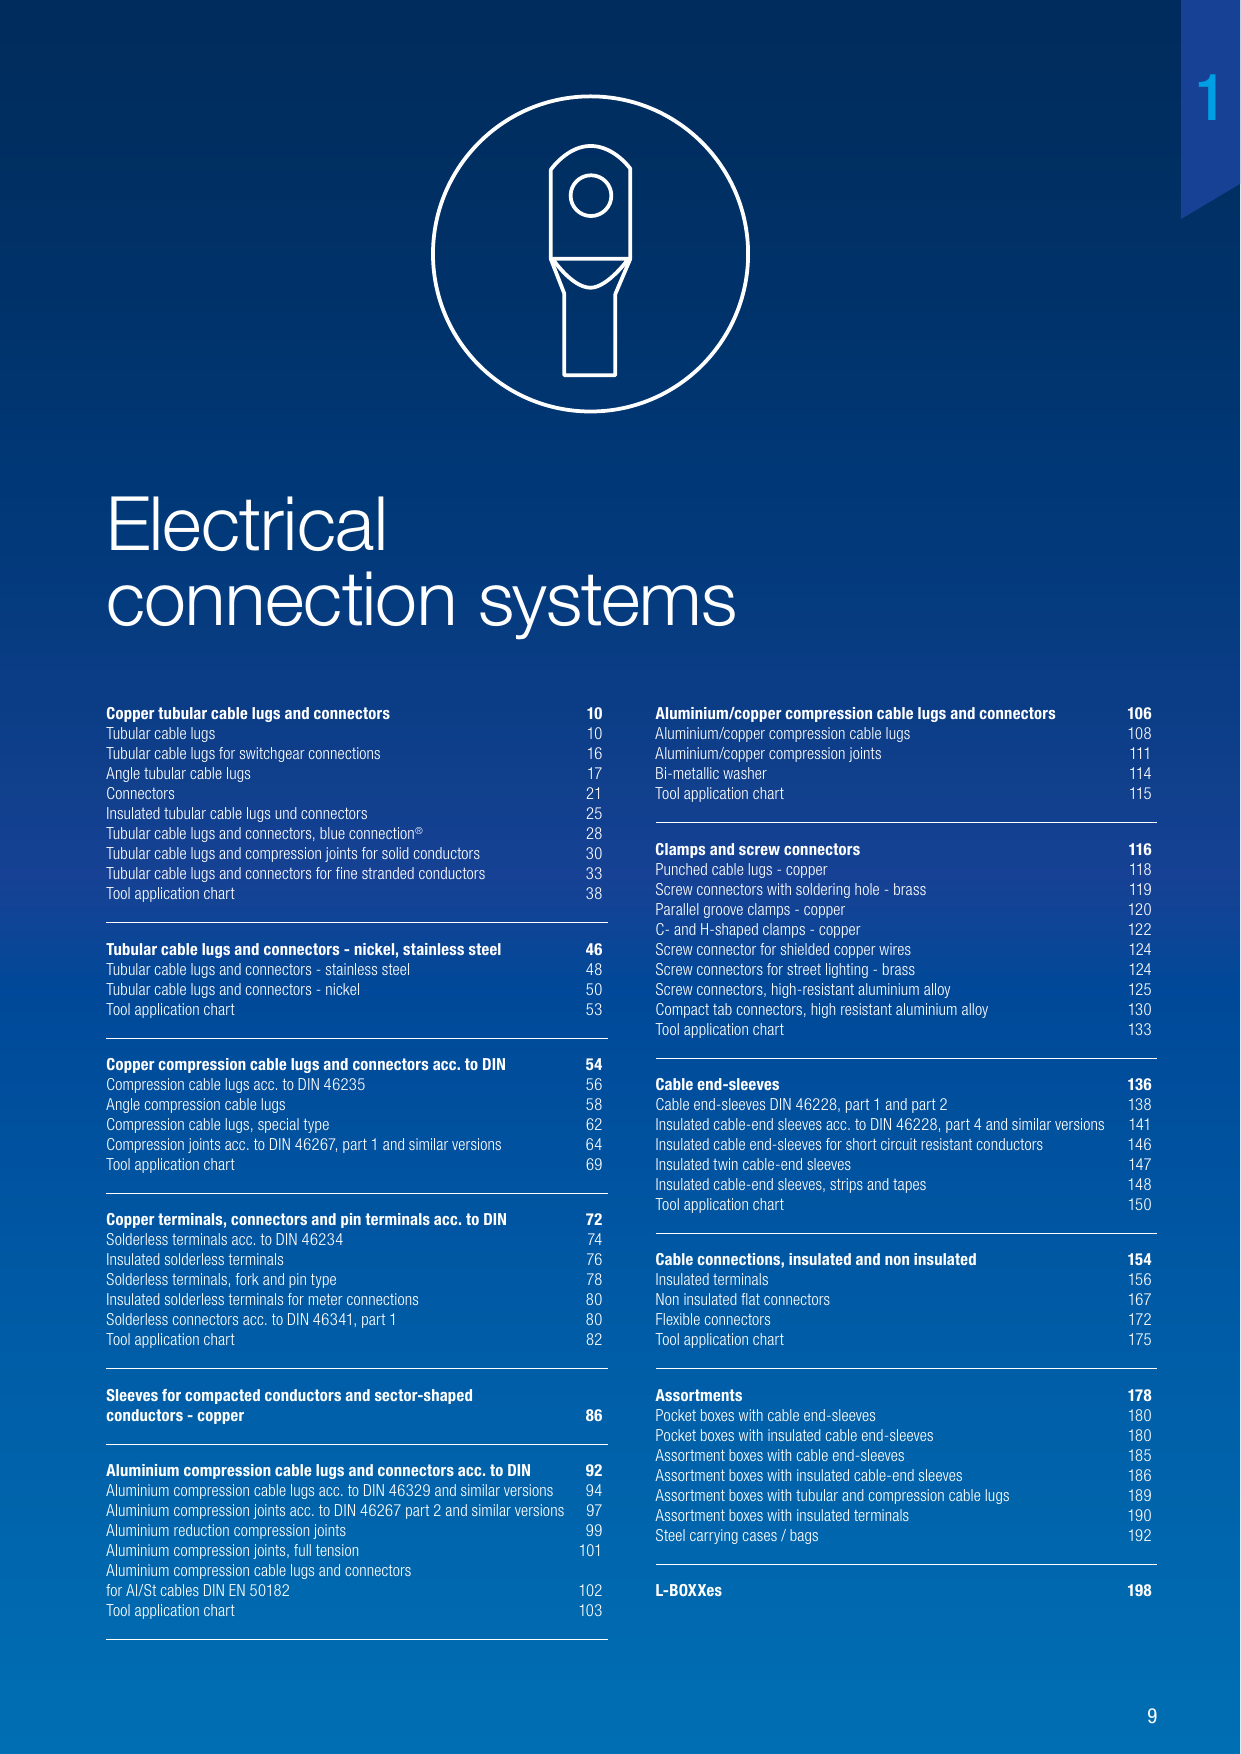 Electrical connection systems | Manualzz